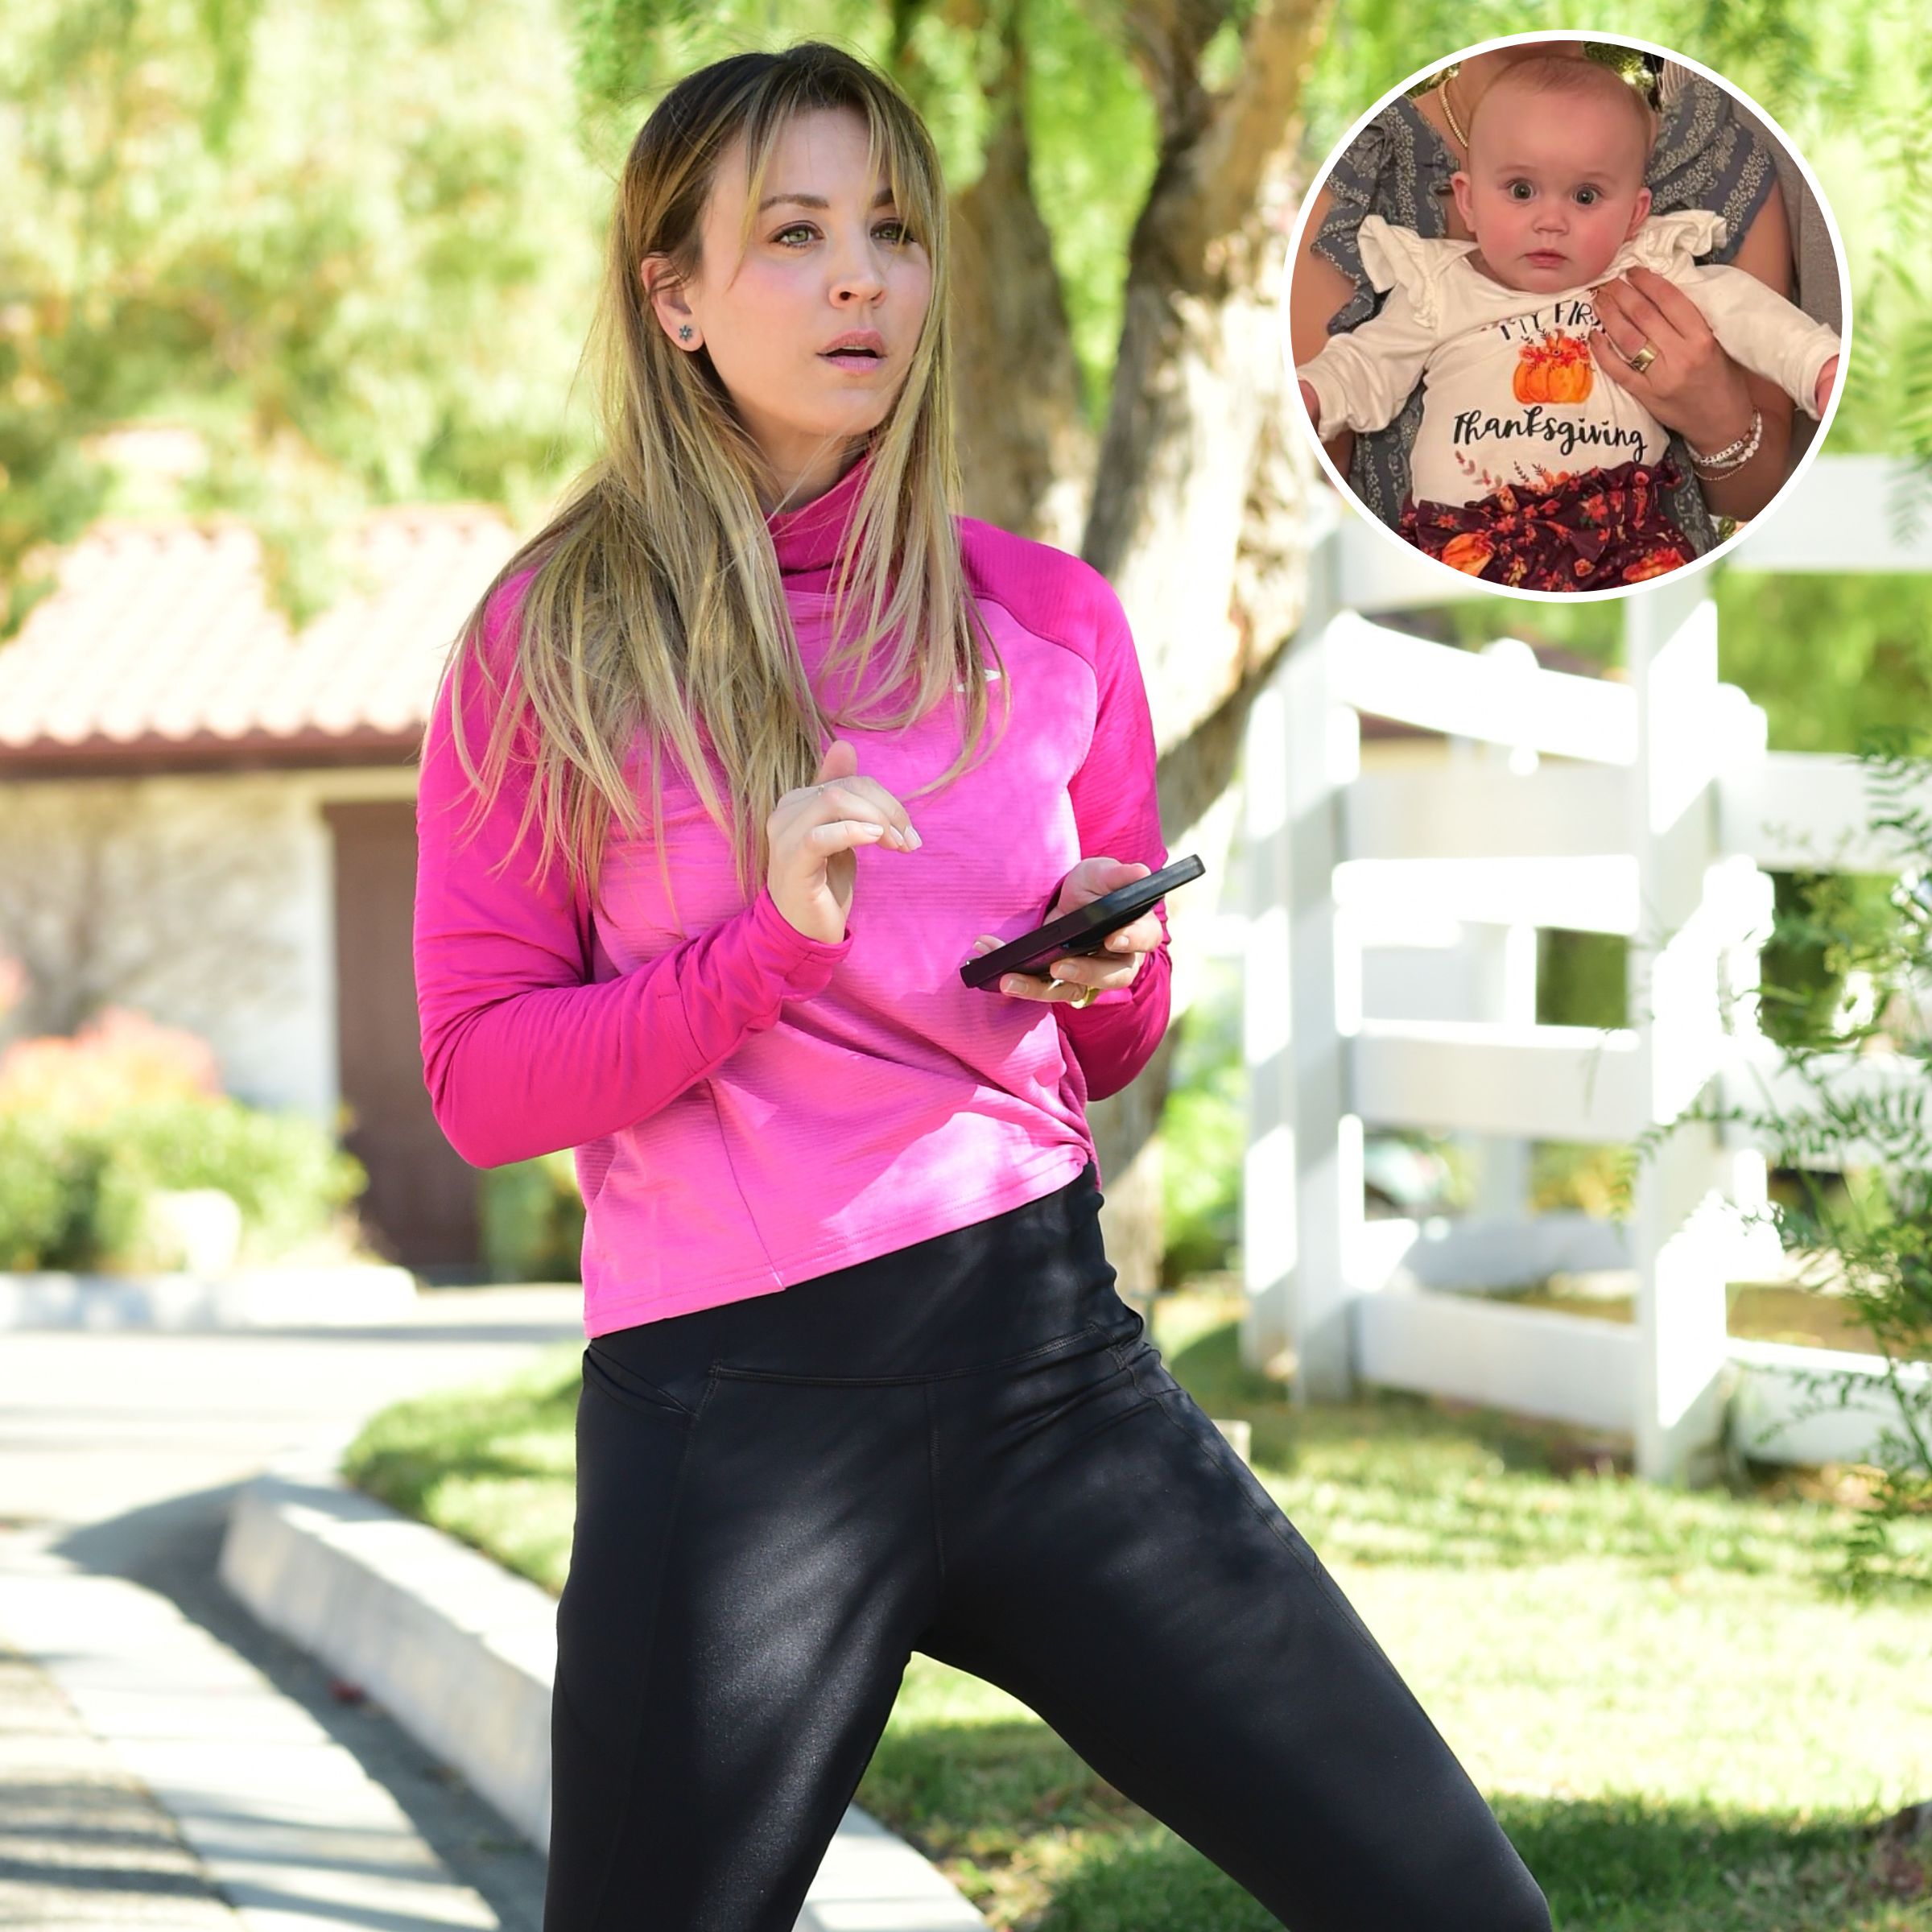 Hot Yoga Transformed Kaley Cuoco's Body: Can It Transform Yours